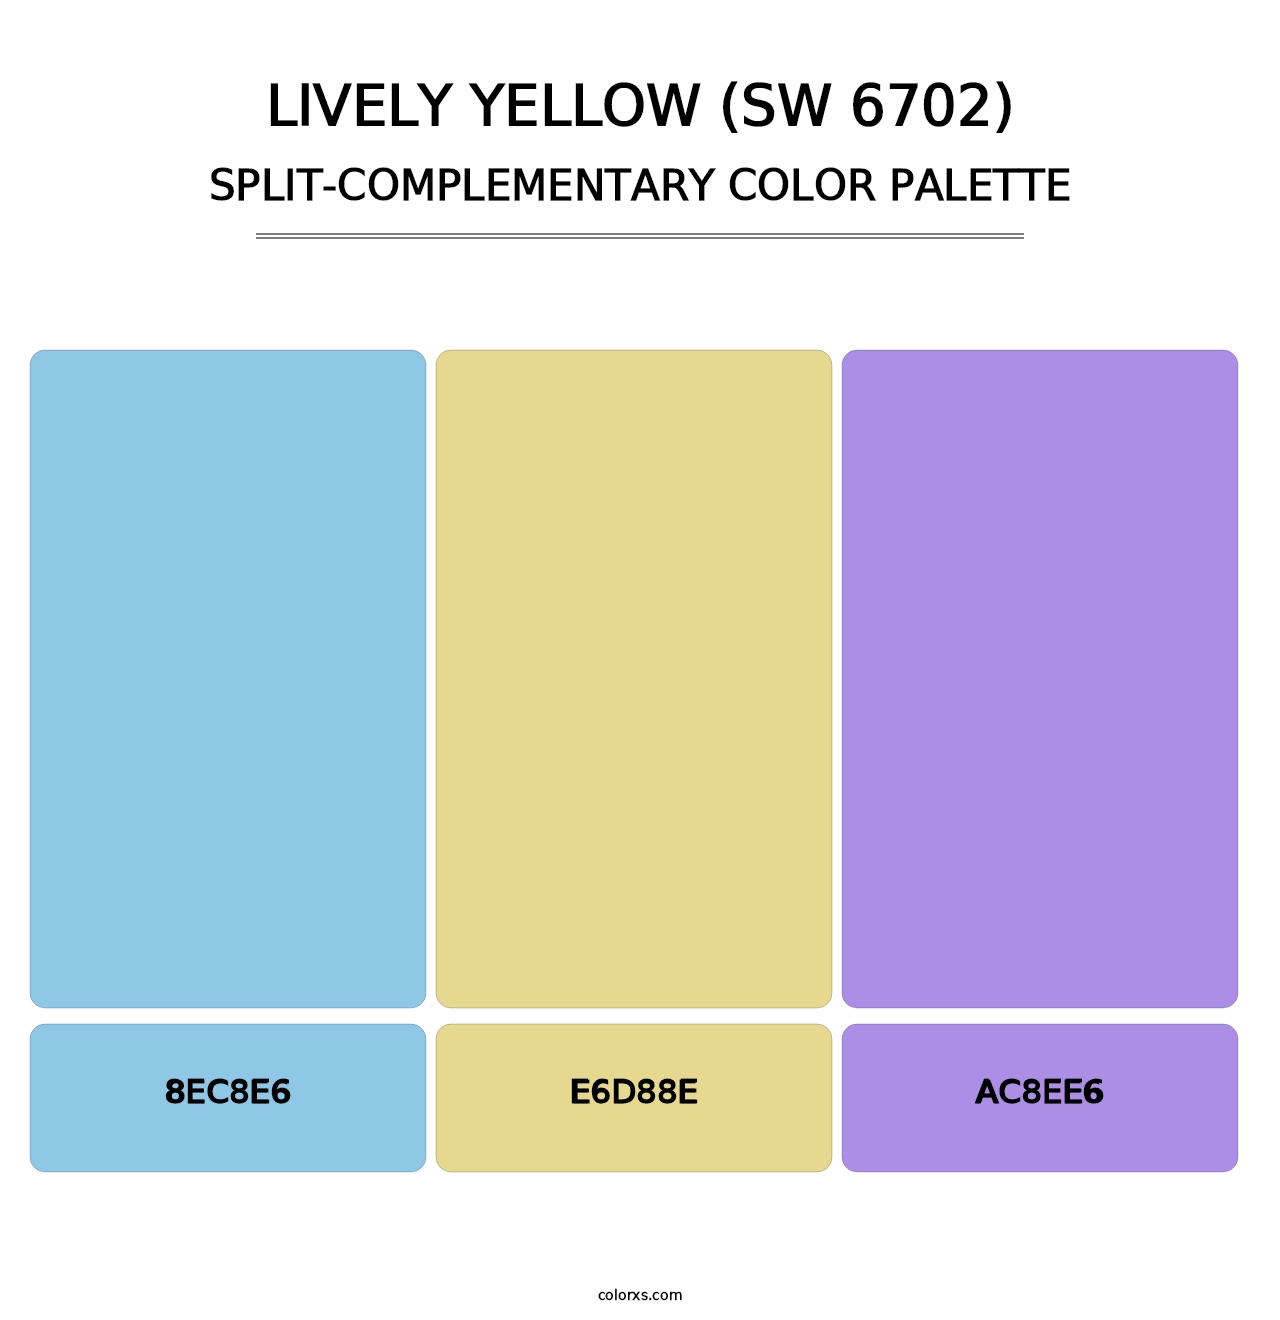 Lively Yellow (SW 6702) - Split-Complementary Color Palette